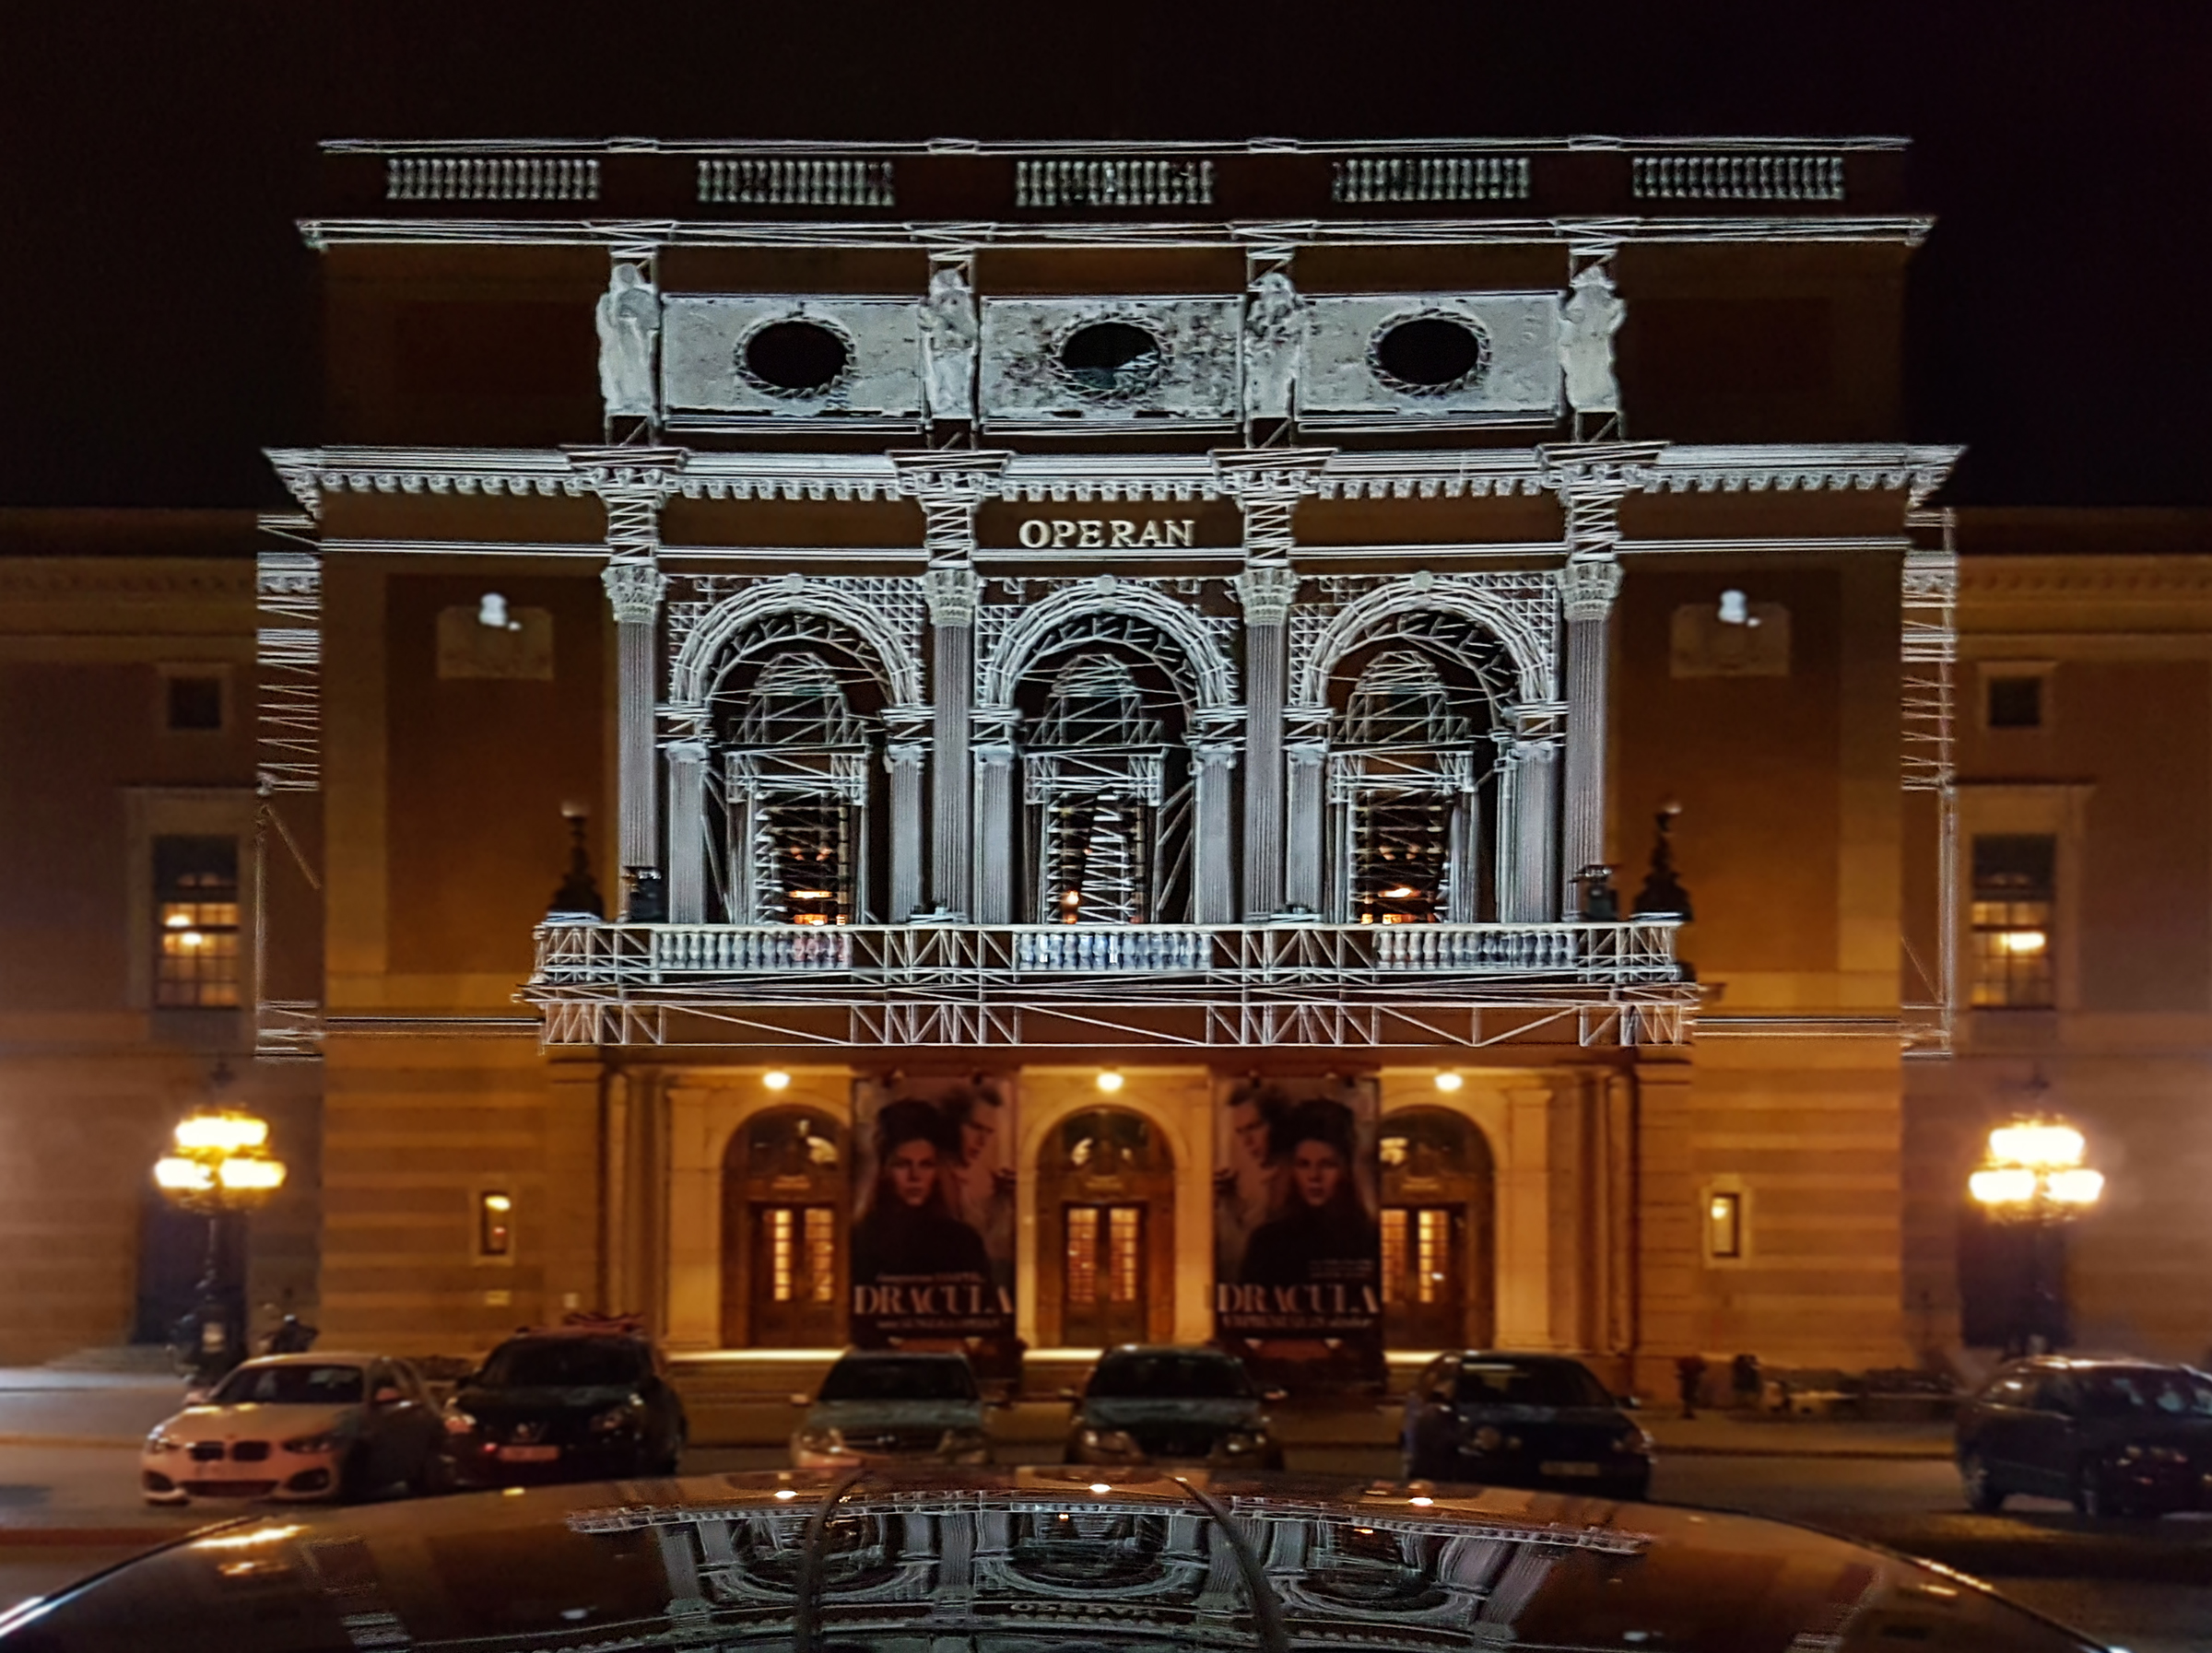 Swedish Opera House with projection